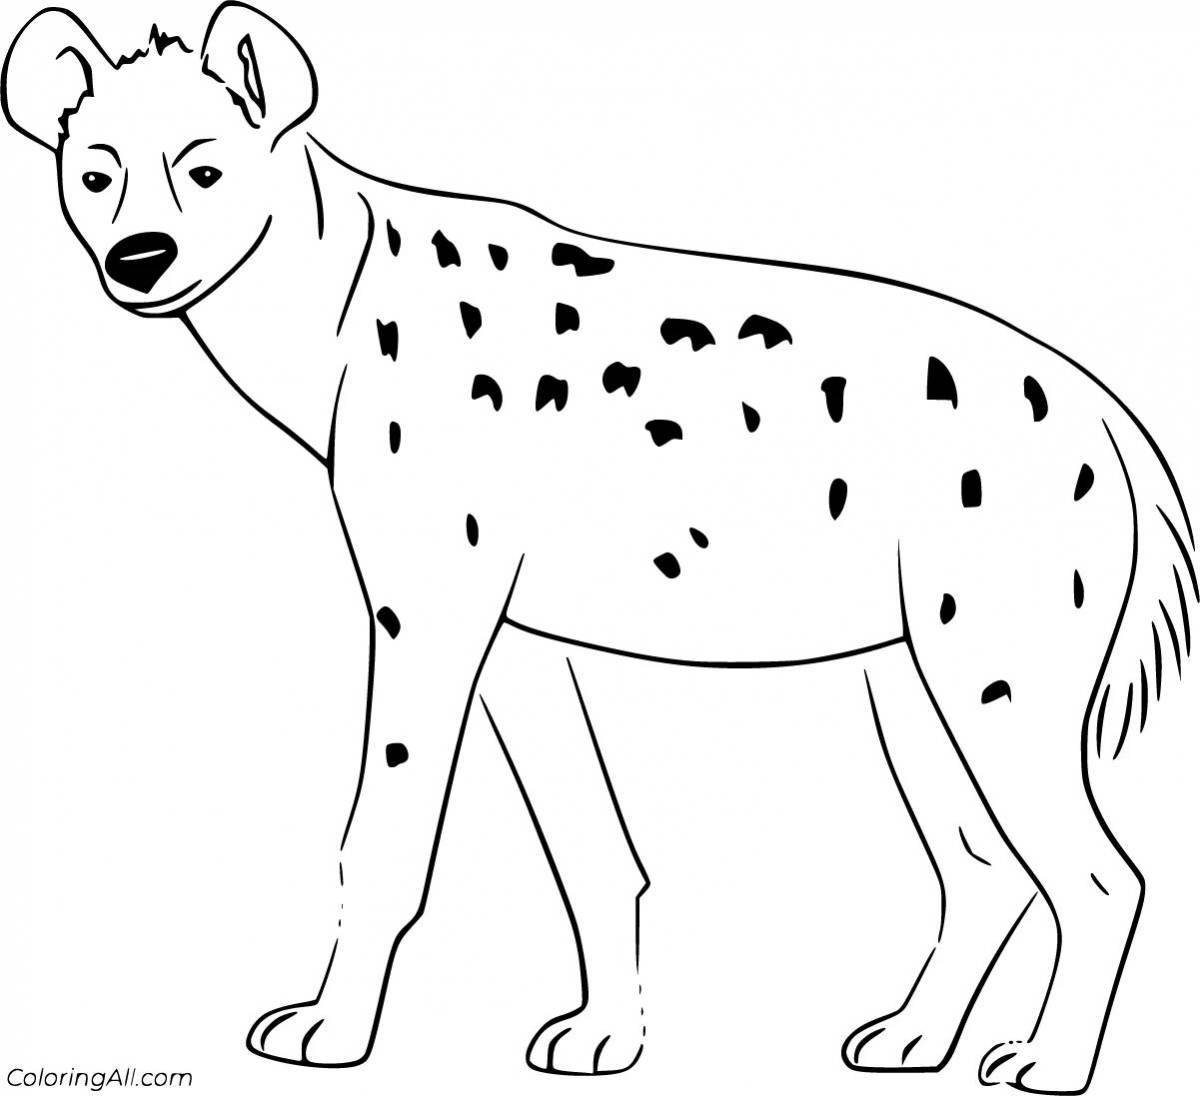 Adorable hyena coloring page for kids